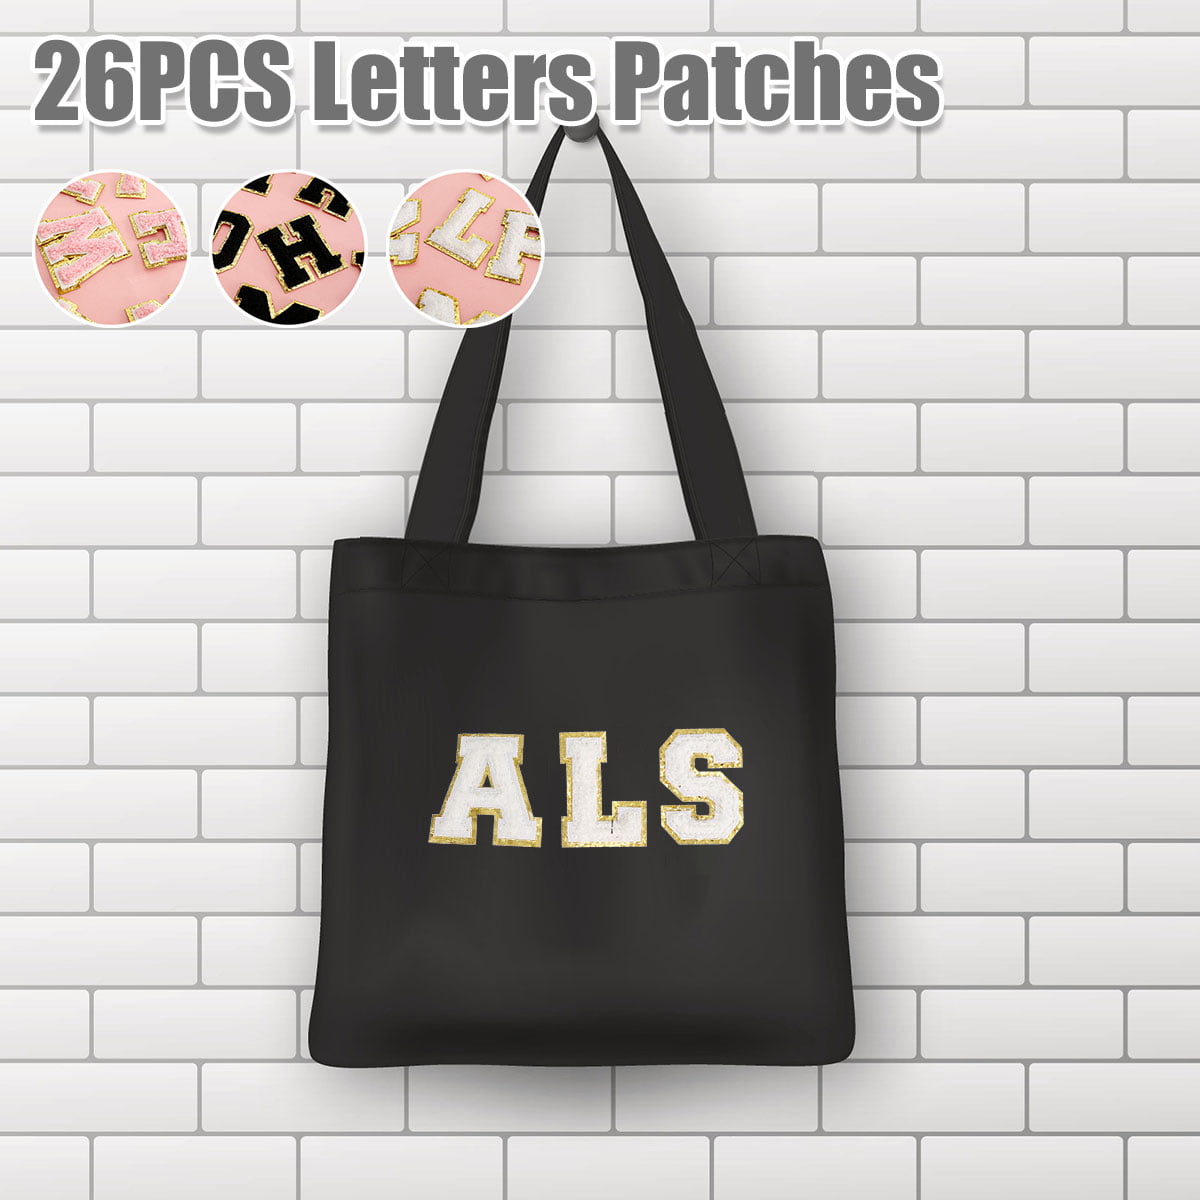 Gpoty Letter Patches - 26Piece Alphabet Applique Patches, Iron on Patches,  DIY Embroidered Patches for Hats, Jackets, Shirts, Vests, 1 Sets of 26  Letters 